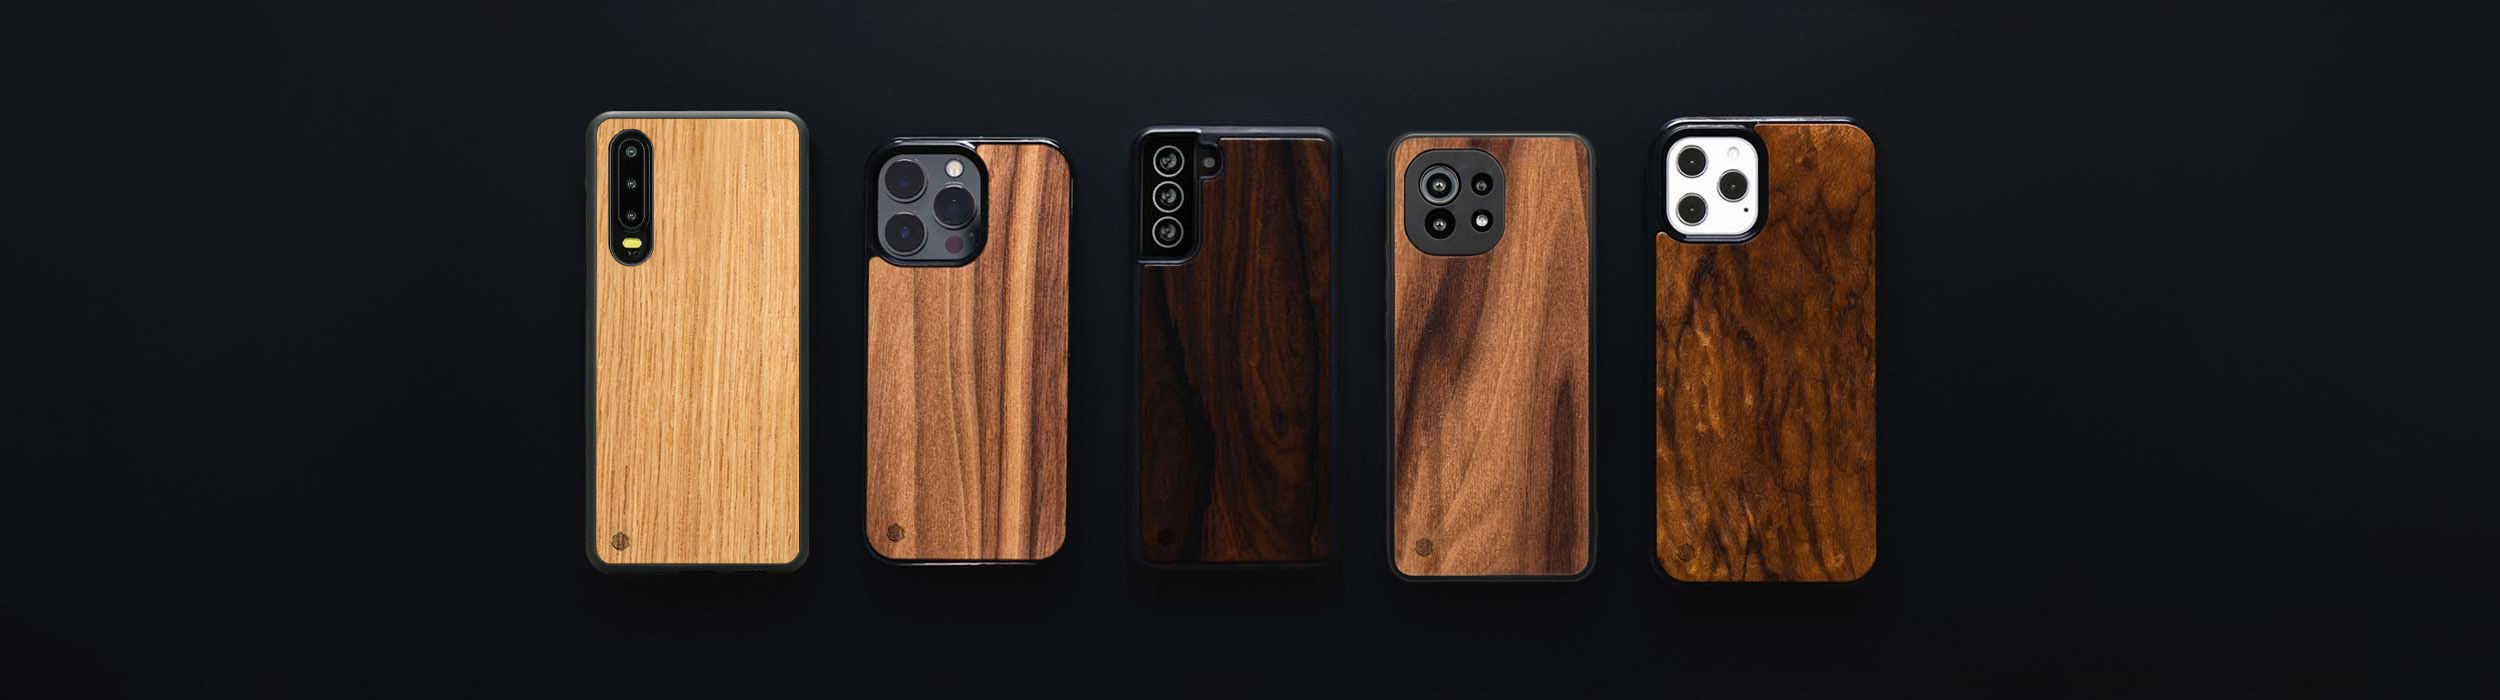 Huawei P30 Pro Wooden Phone Cases